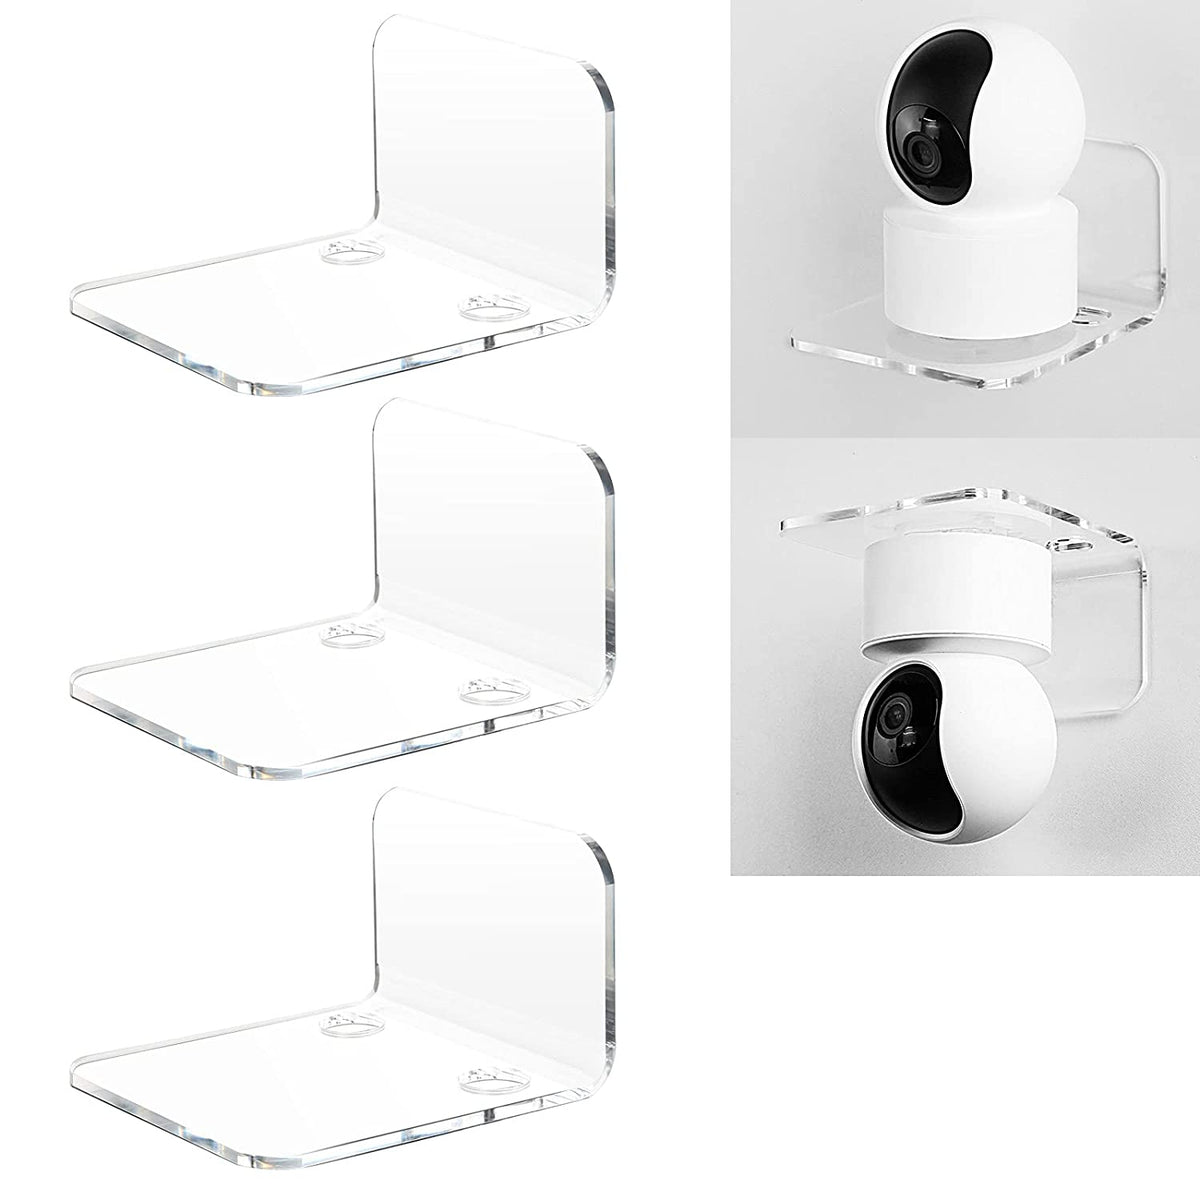 OAPRIRE Small Floating Wall Shelves Set of 4 - Easily Expand Wall Space - 9 inch Acrylic Wall Shelf for Bedroom, Living Room